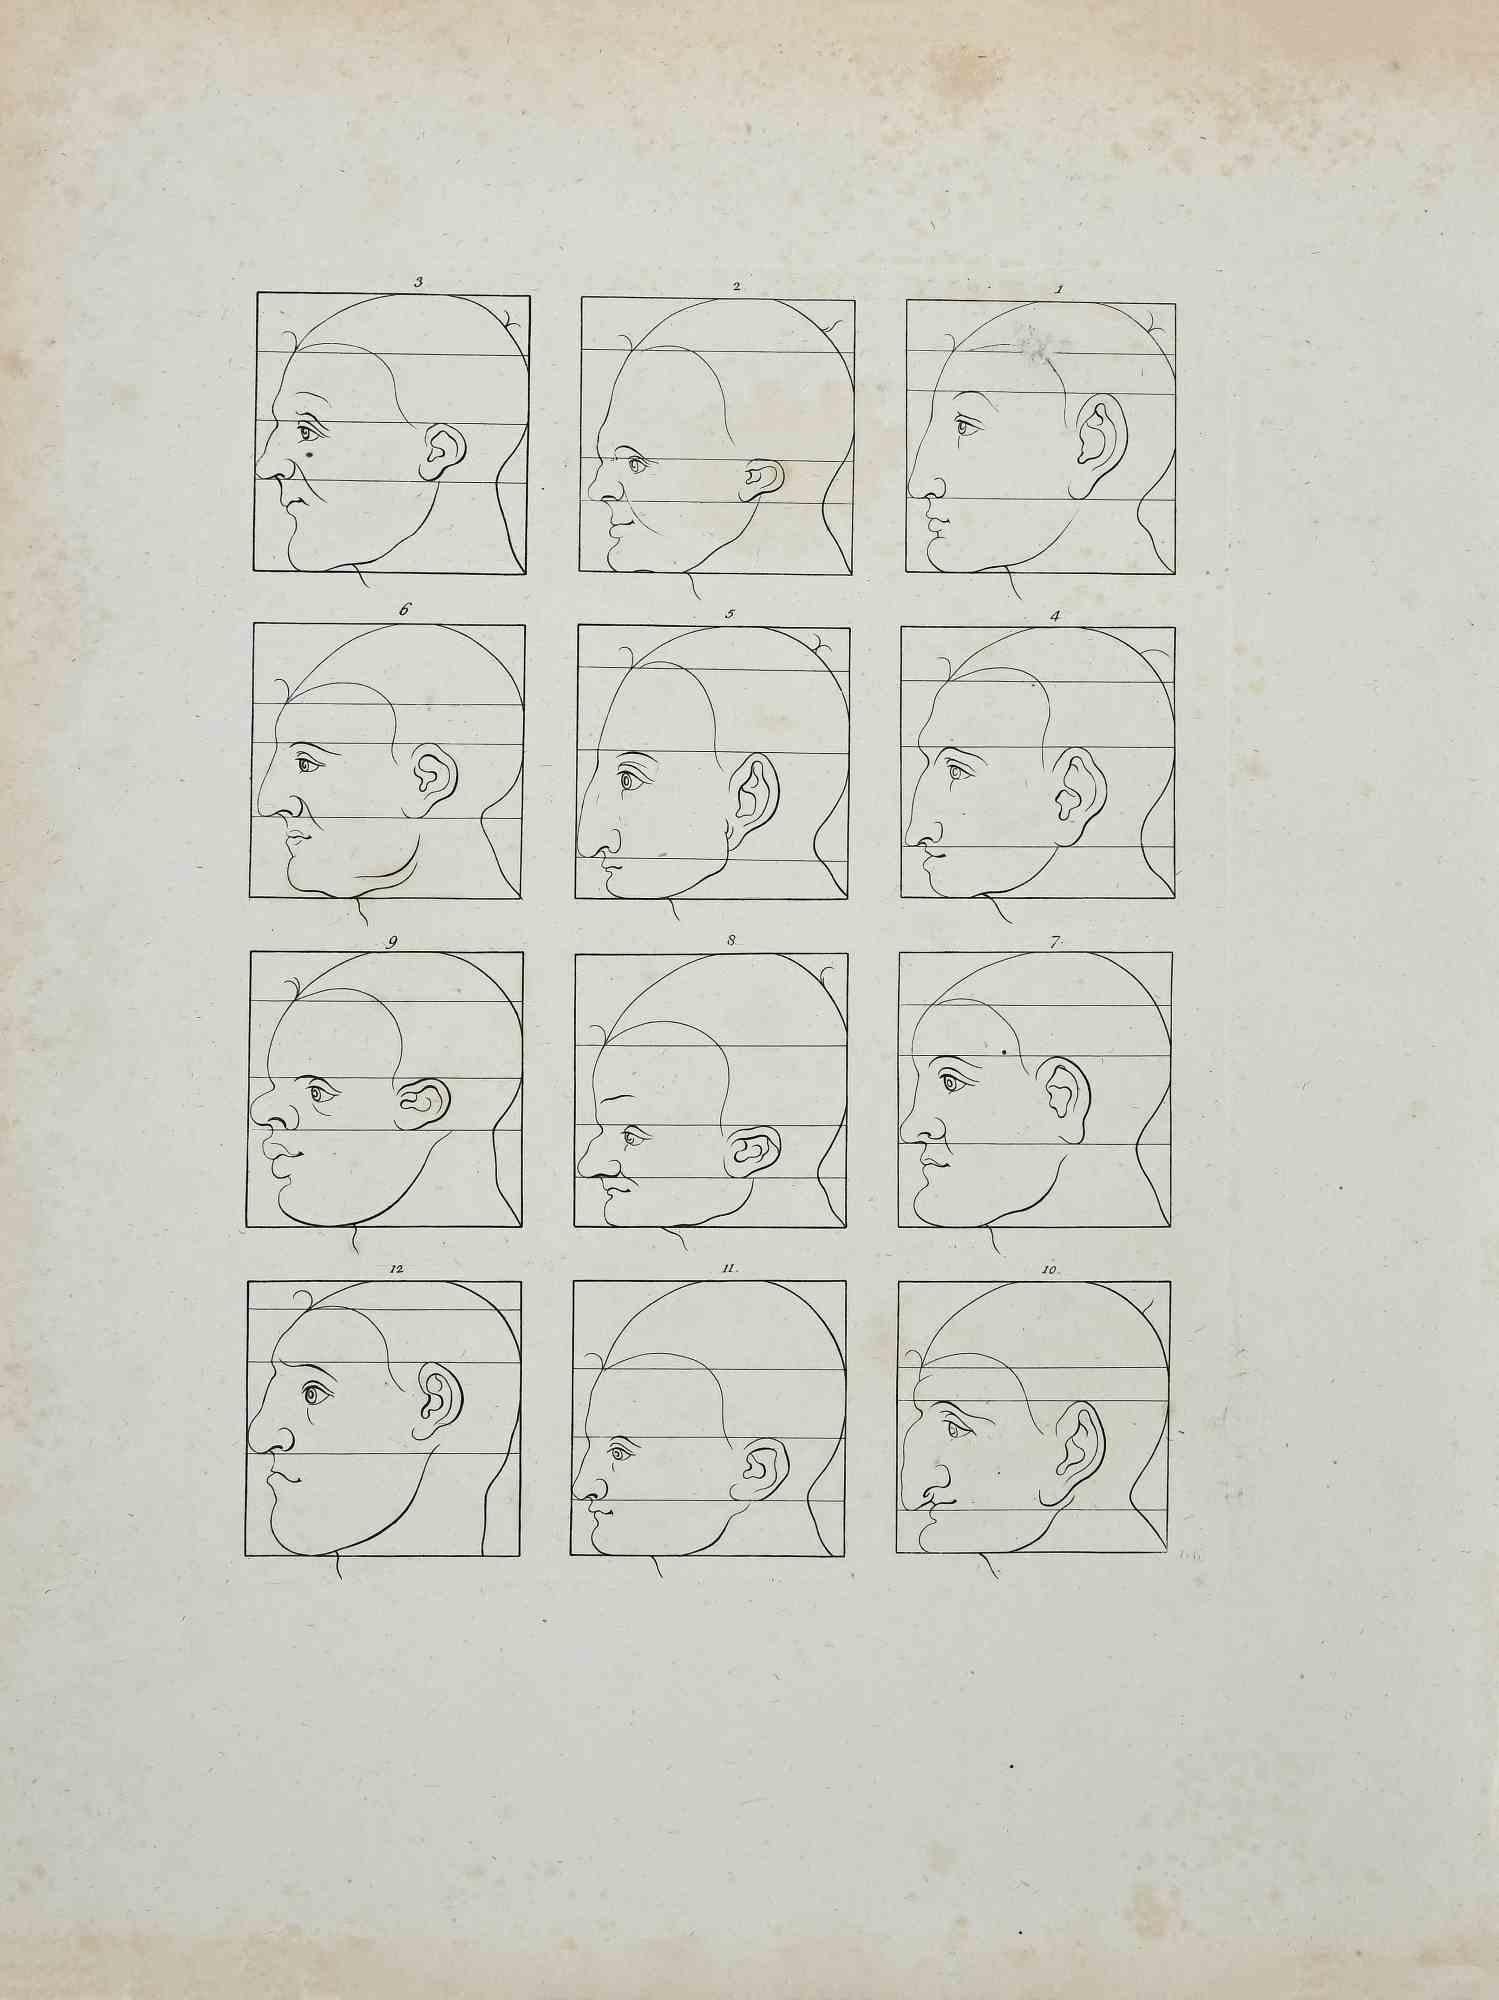 The Profiles - The Physiognomy is an original etching artwork realized by Thomas Holloway for Johann Caspar Lavater's "Essays on Physiognomy, Designed to Promote the Knowledge and the Love of Mankind", London, Bensley, 1810. 

Good conditions with